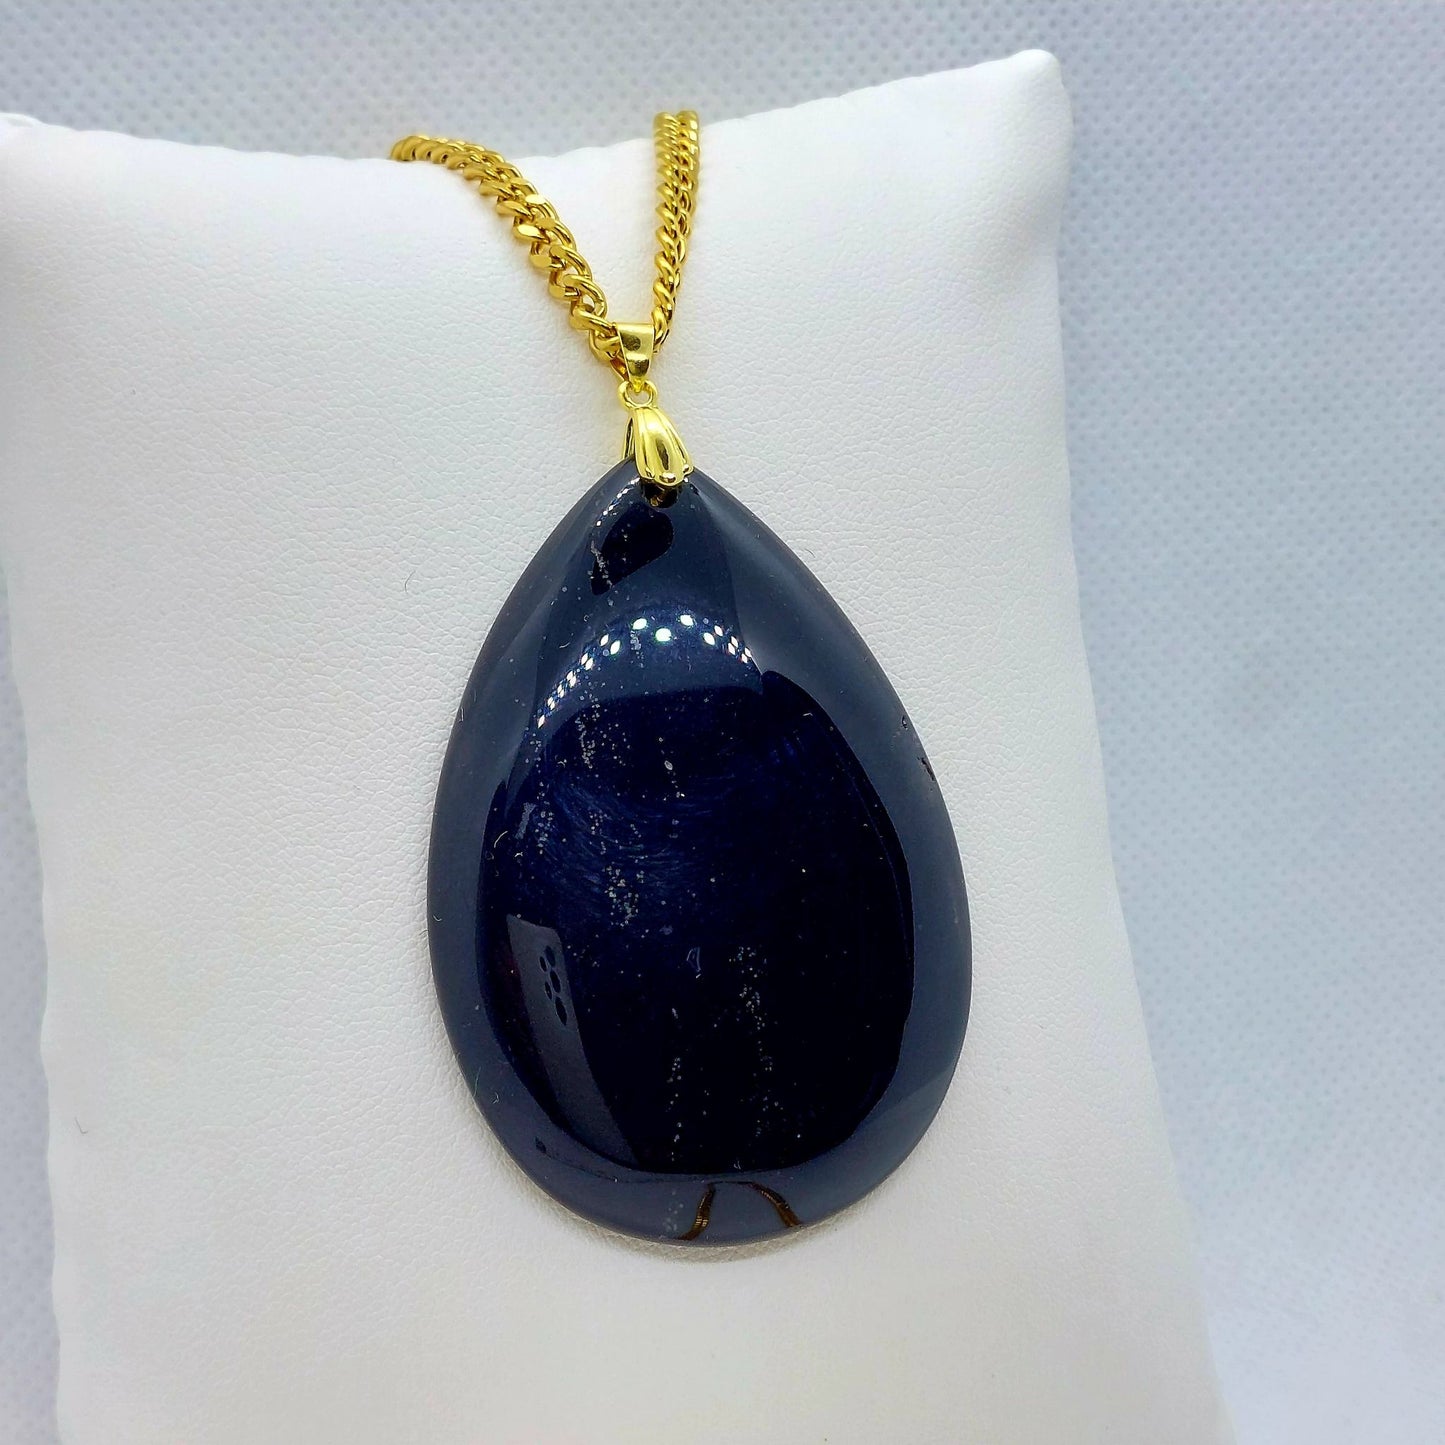 Natural Black Onyx Teardrop Pendant - Stainless Steel Gold Plated Necklace Chain